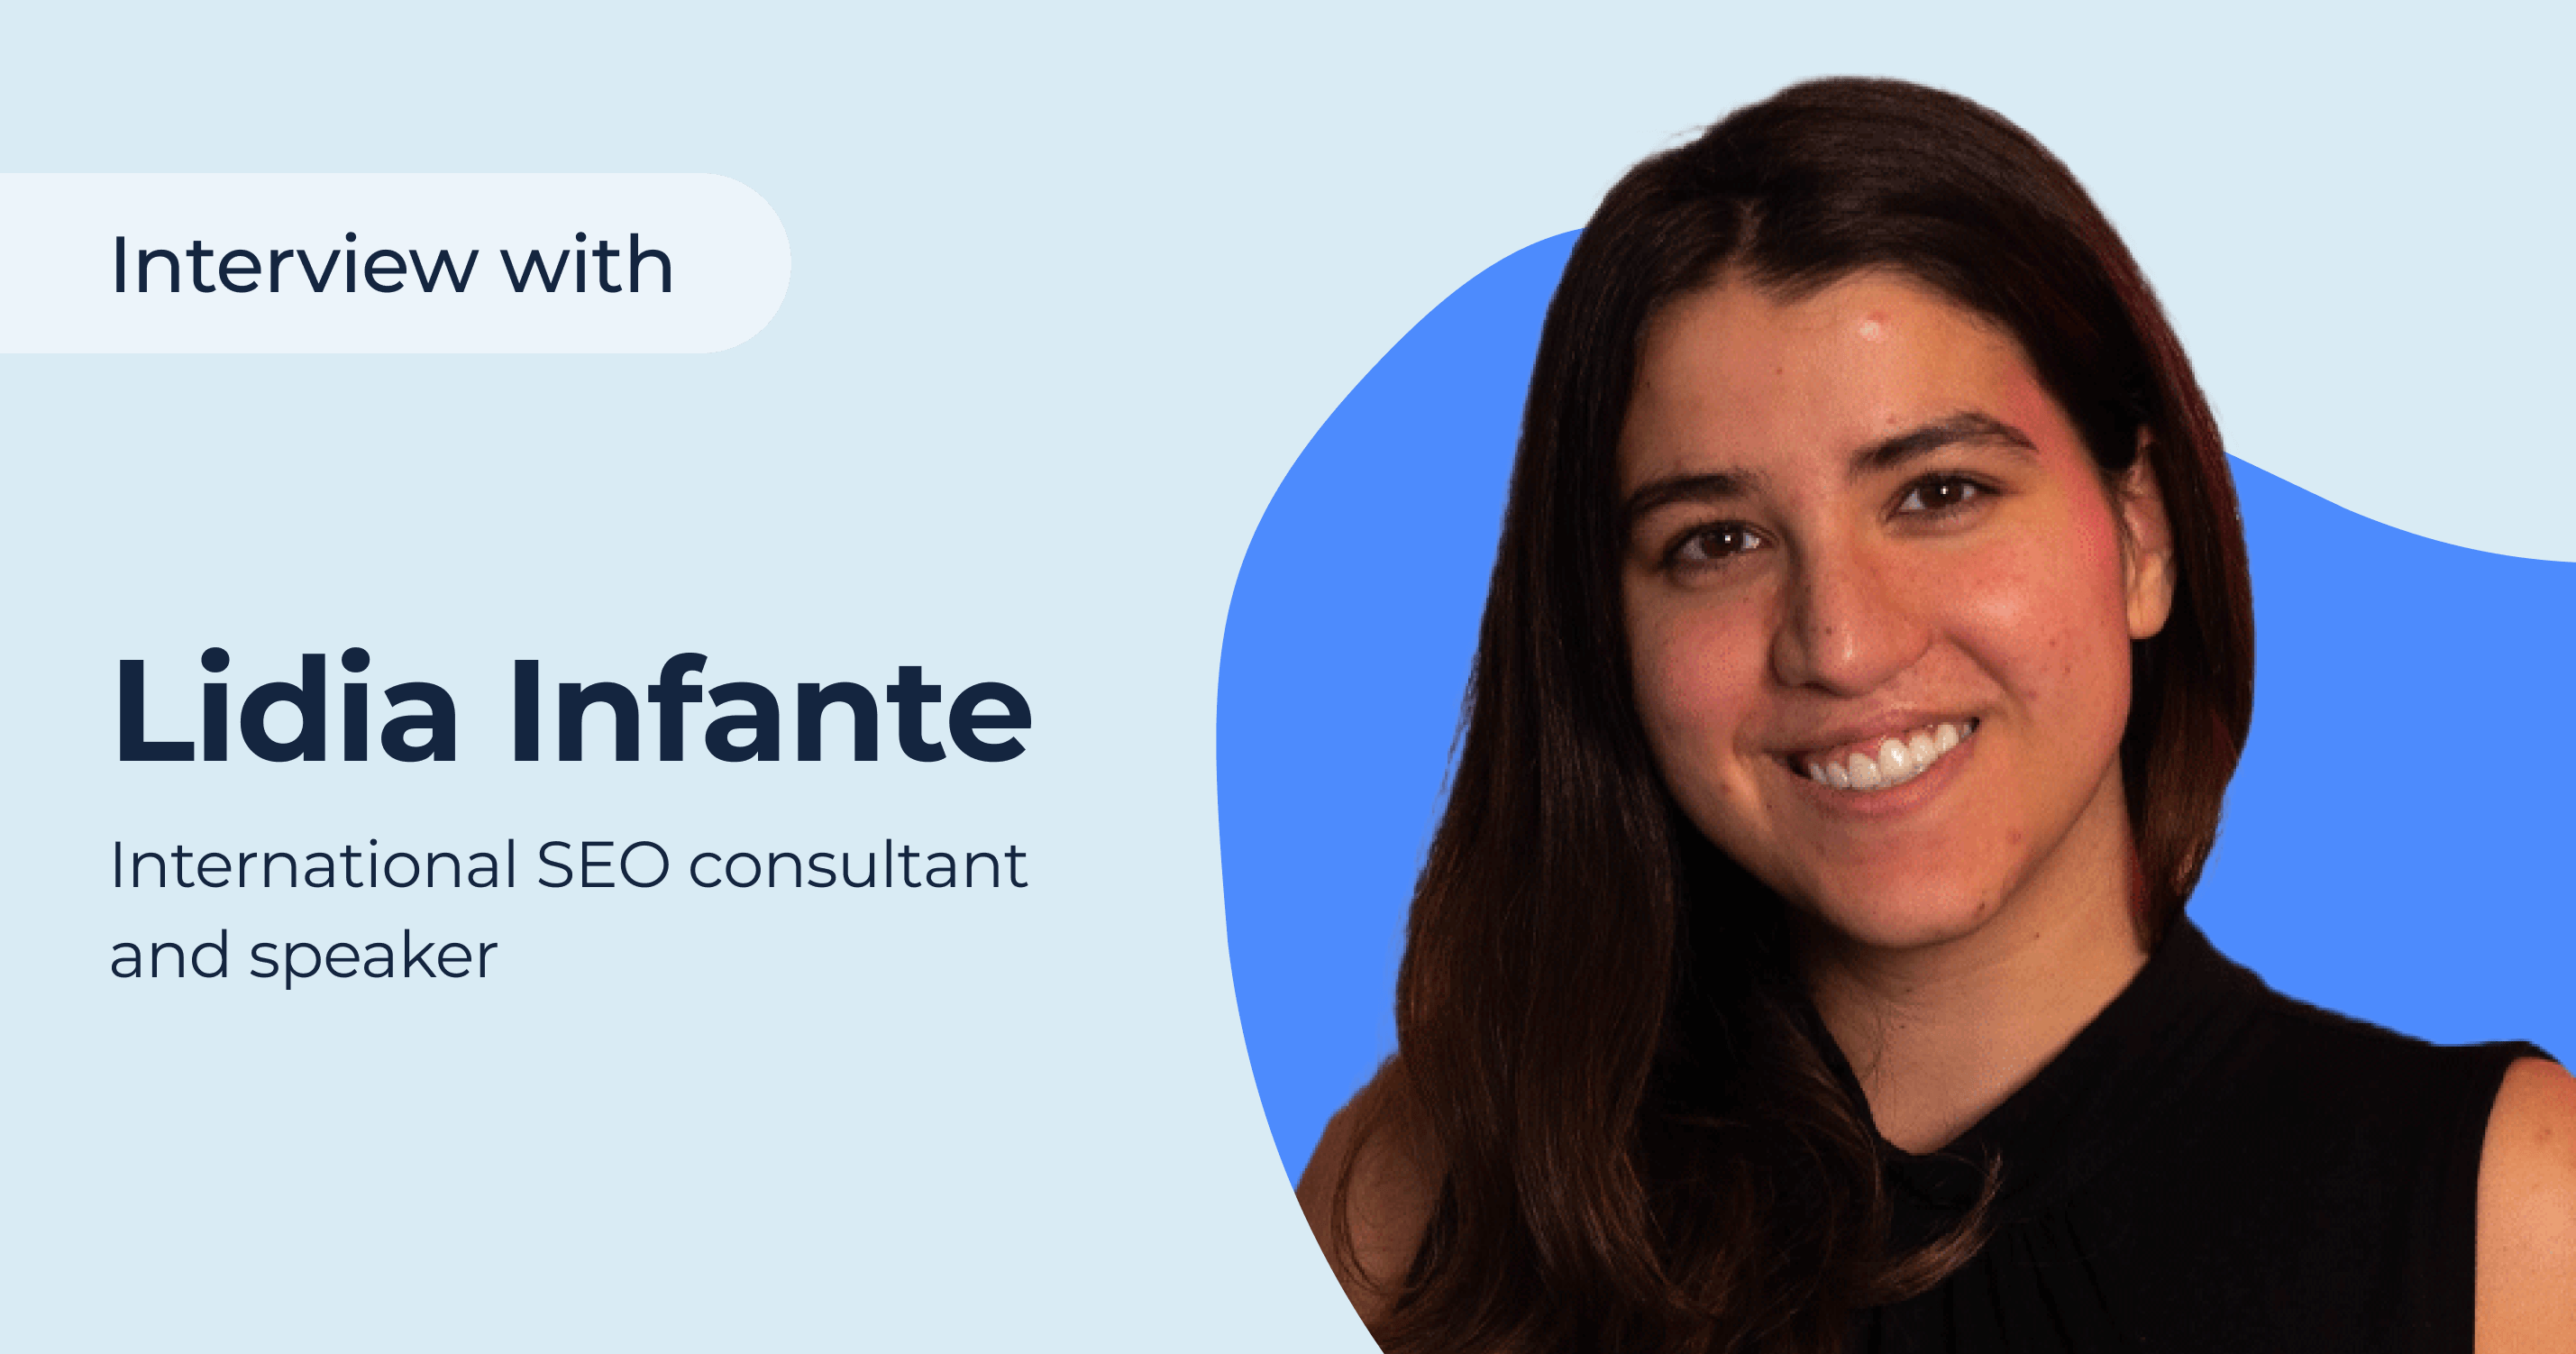 International SEO Best Practices by Lidia Infante